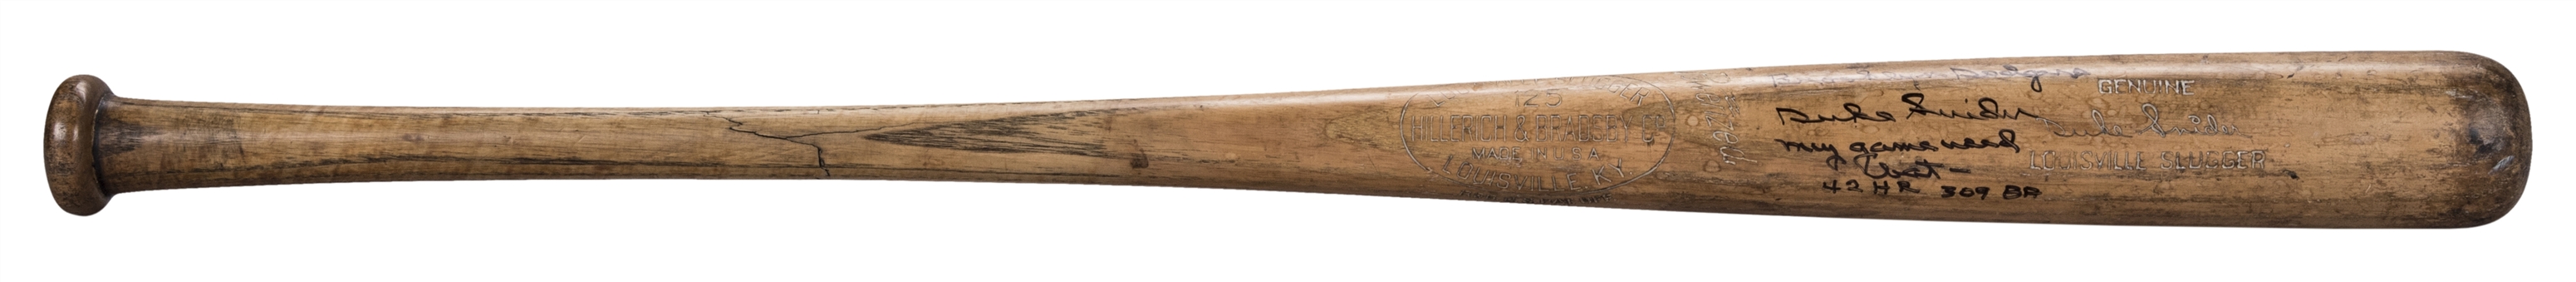 1950-60 Duke Snider Game Used And Signed Louisville Slugger C117L Model Bat (MEARS A9)